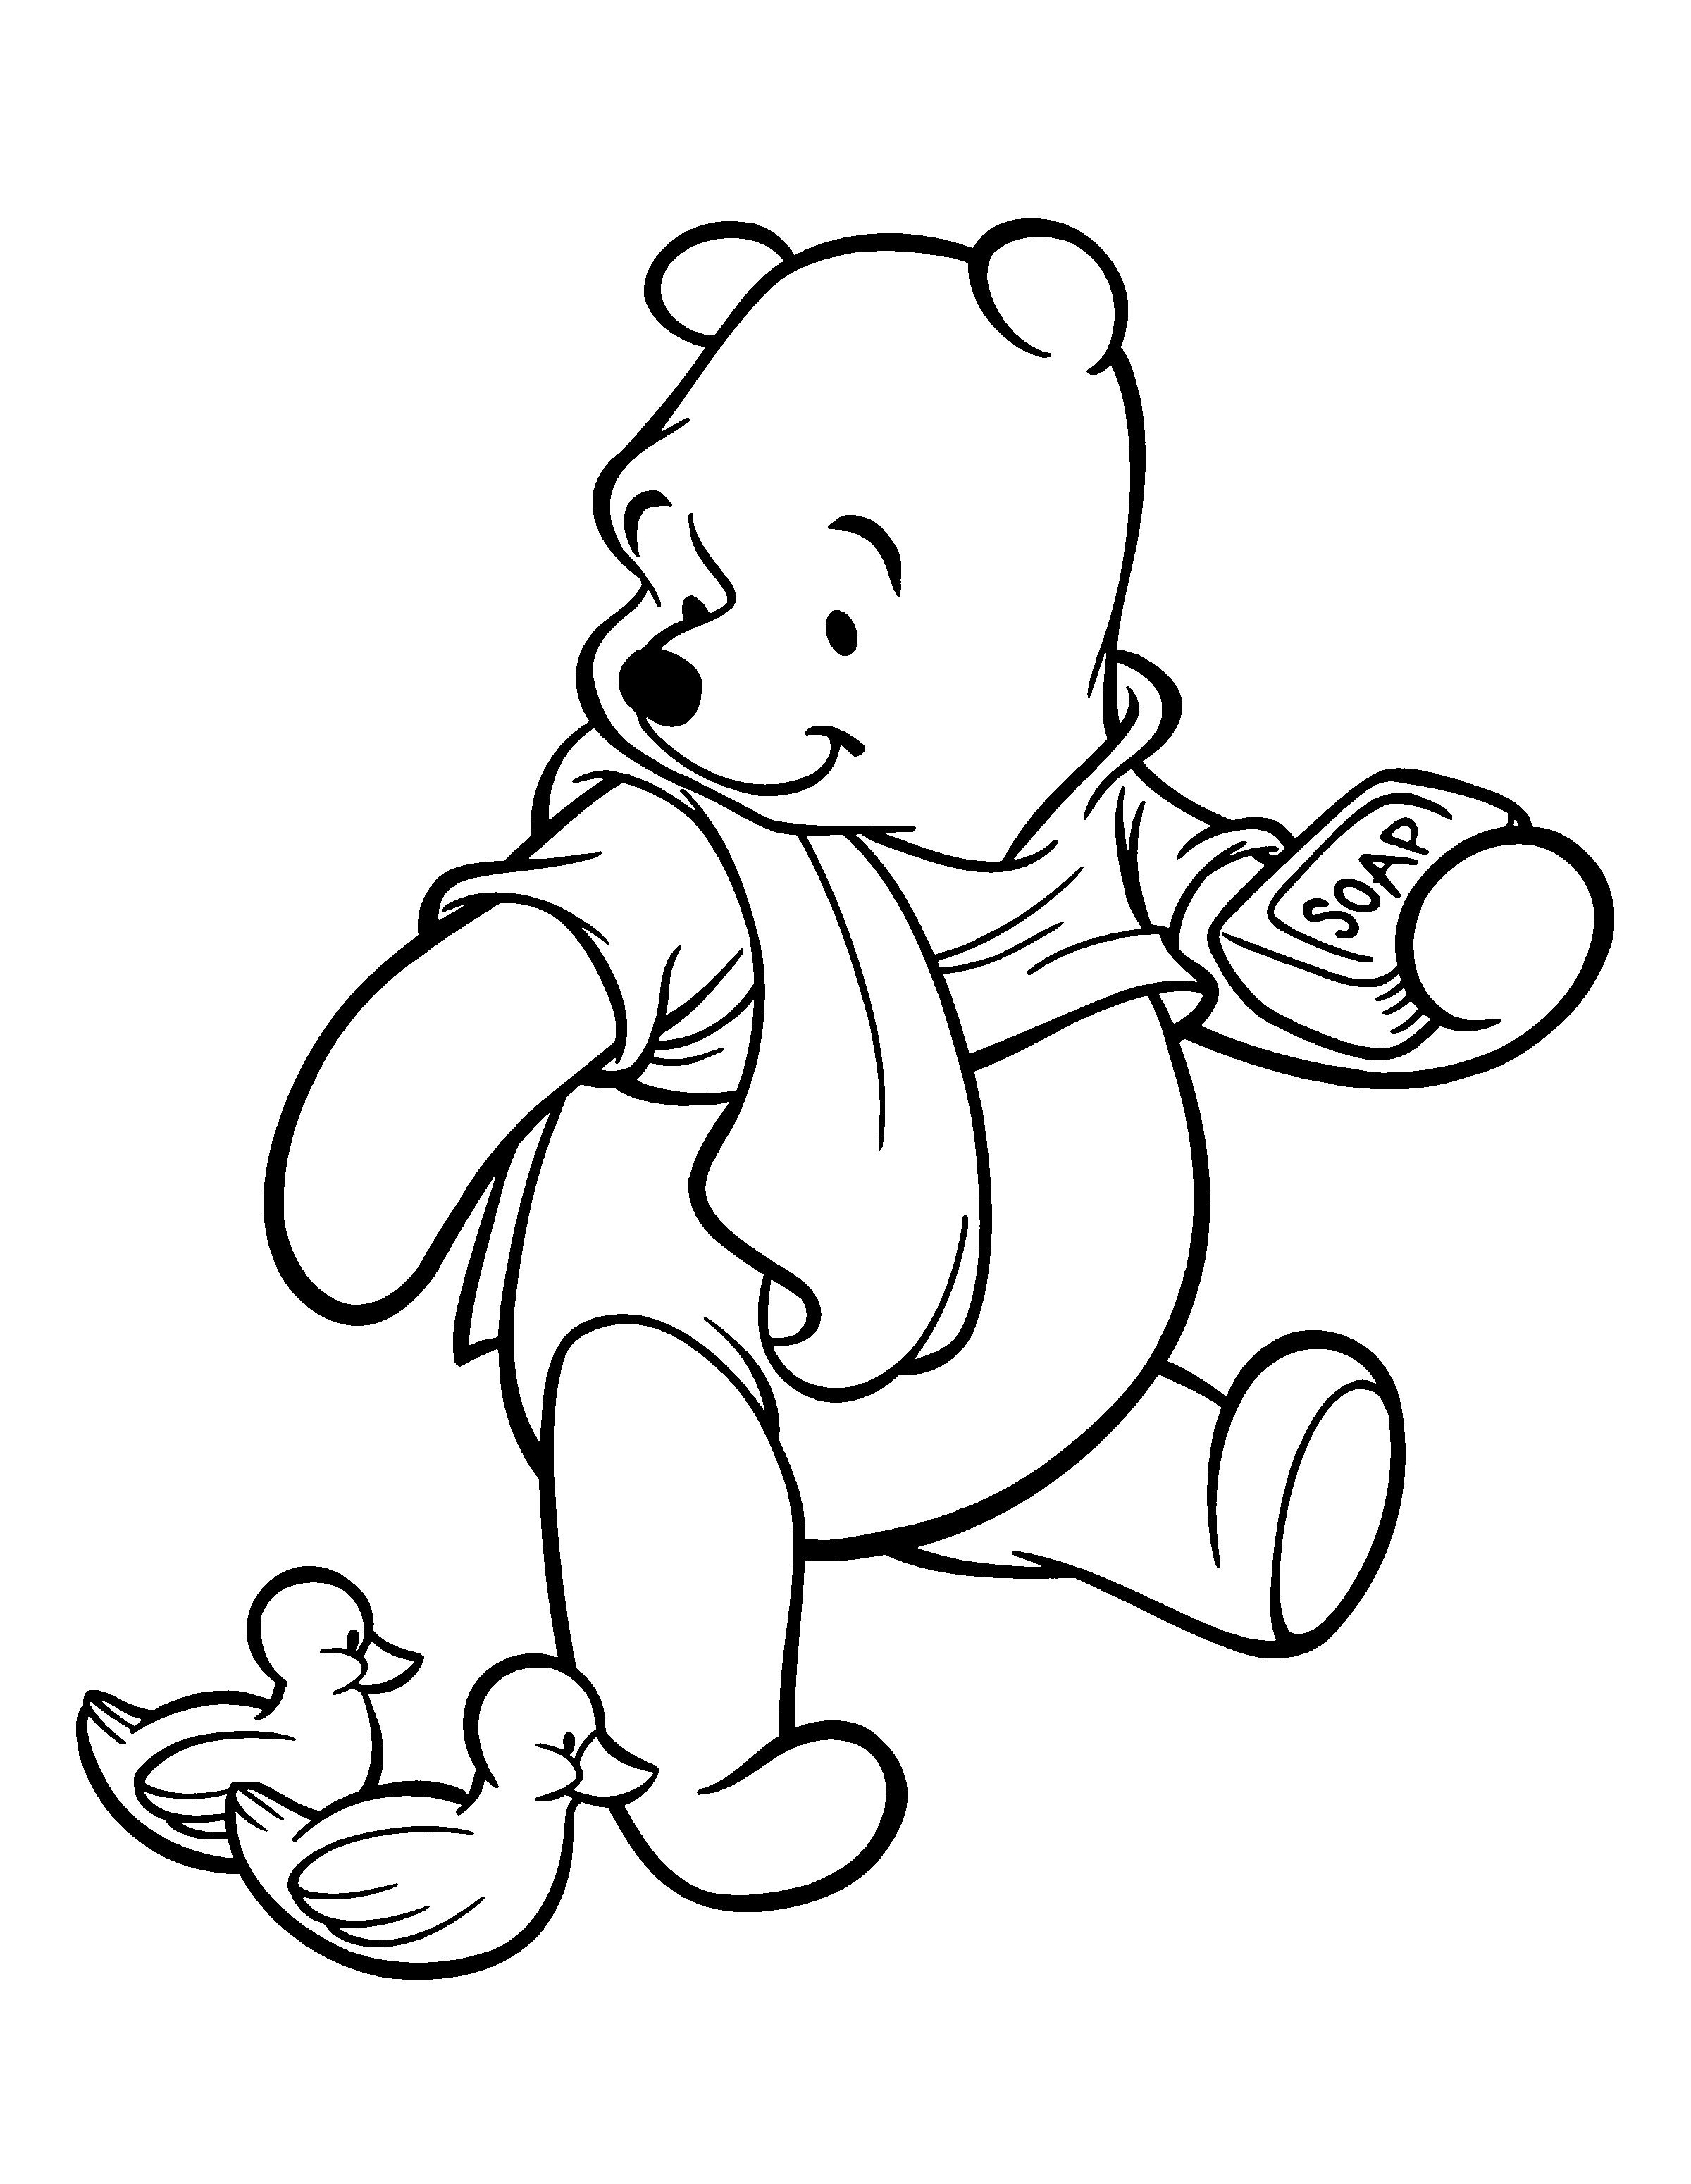 winnie the pooh colouring free printable winnie the pooh coloring pages for kids winnie the pooh colouring 